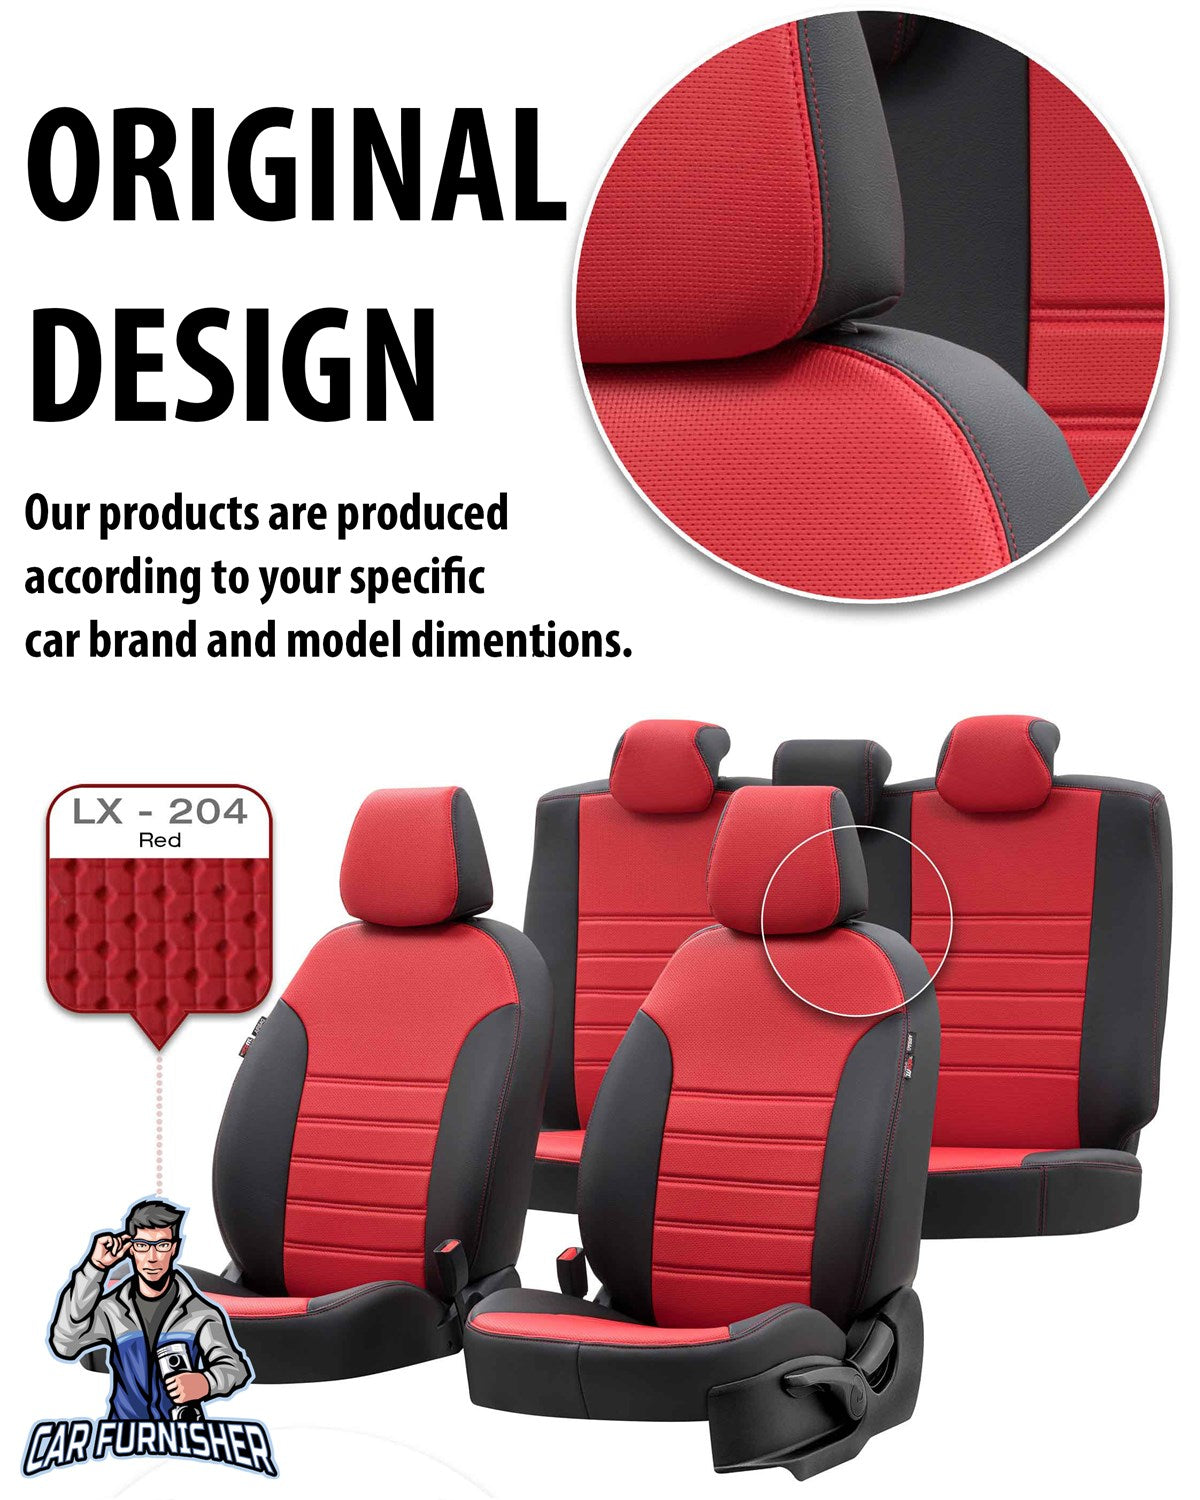 Fiat Stilo Seat Covers New York Leather Design Smoked Black Leather